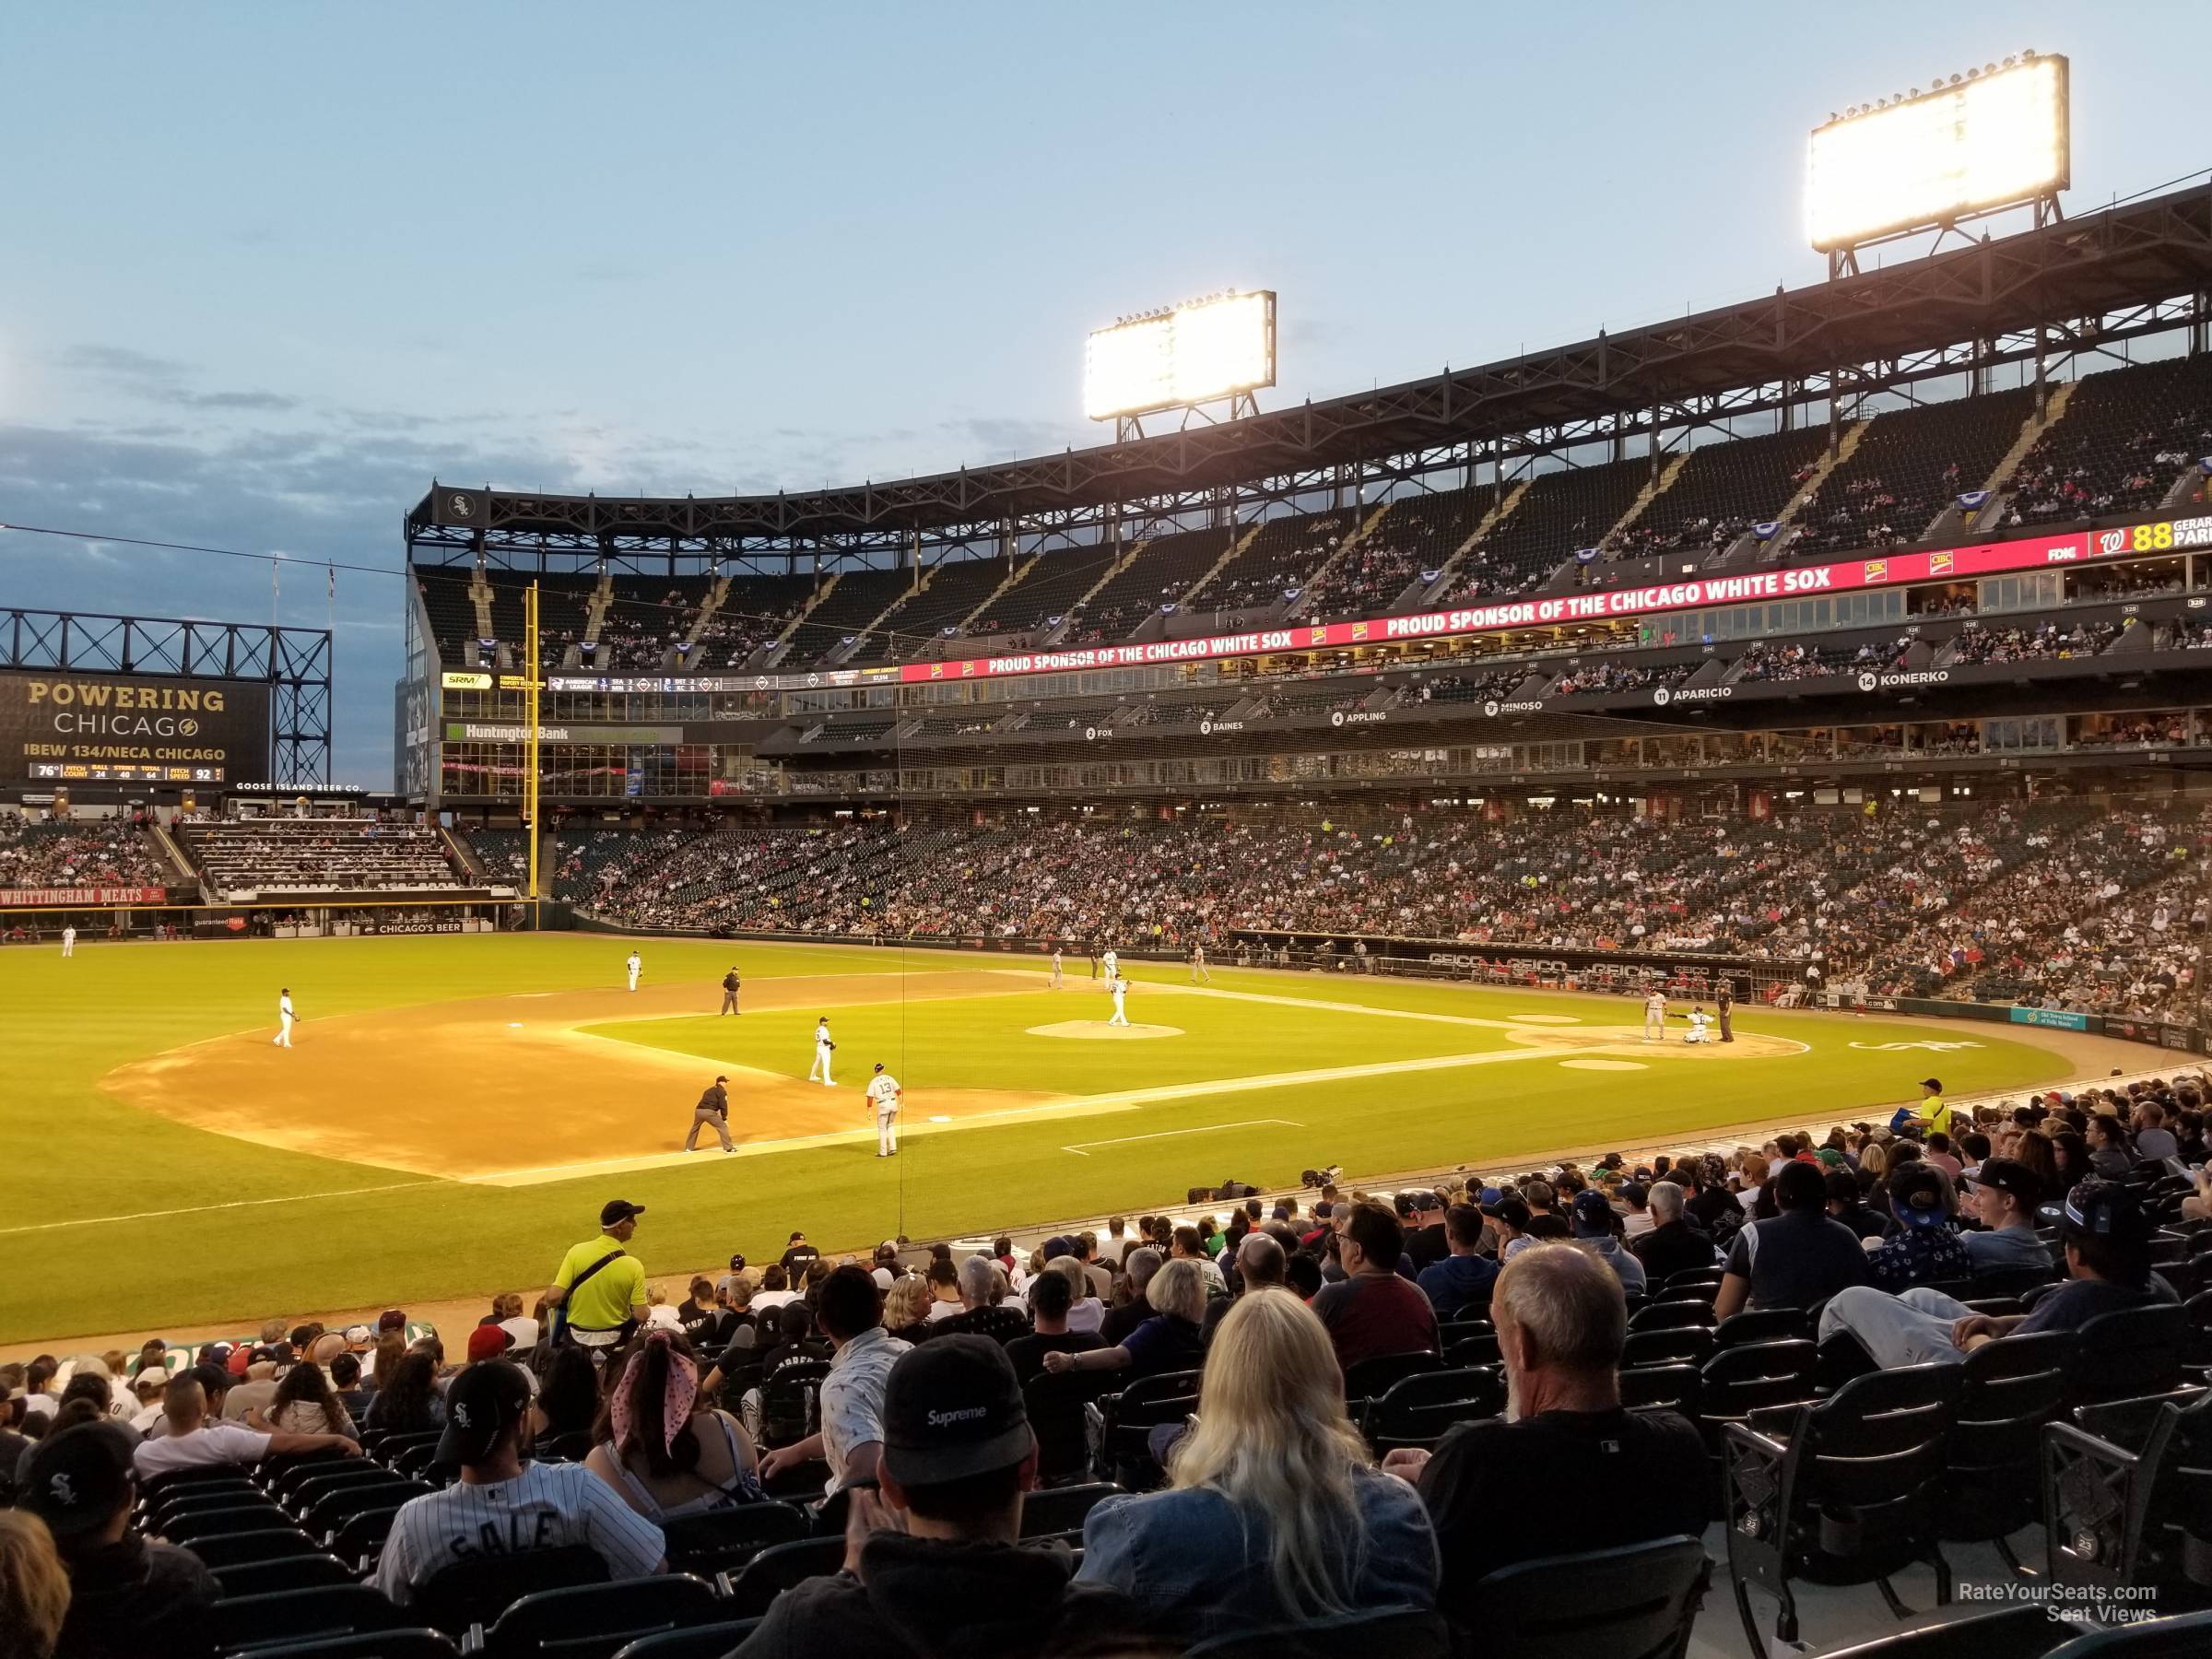 section 144, row 26 seat view  - guaranteed rate field